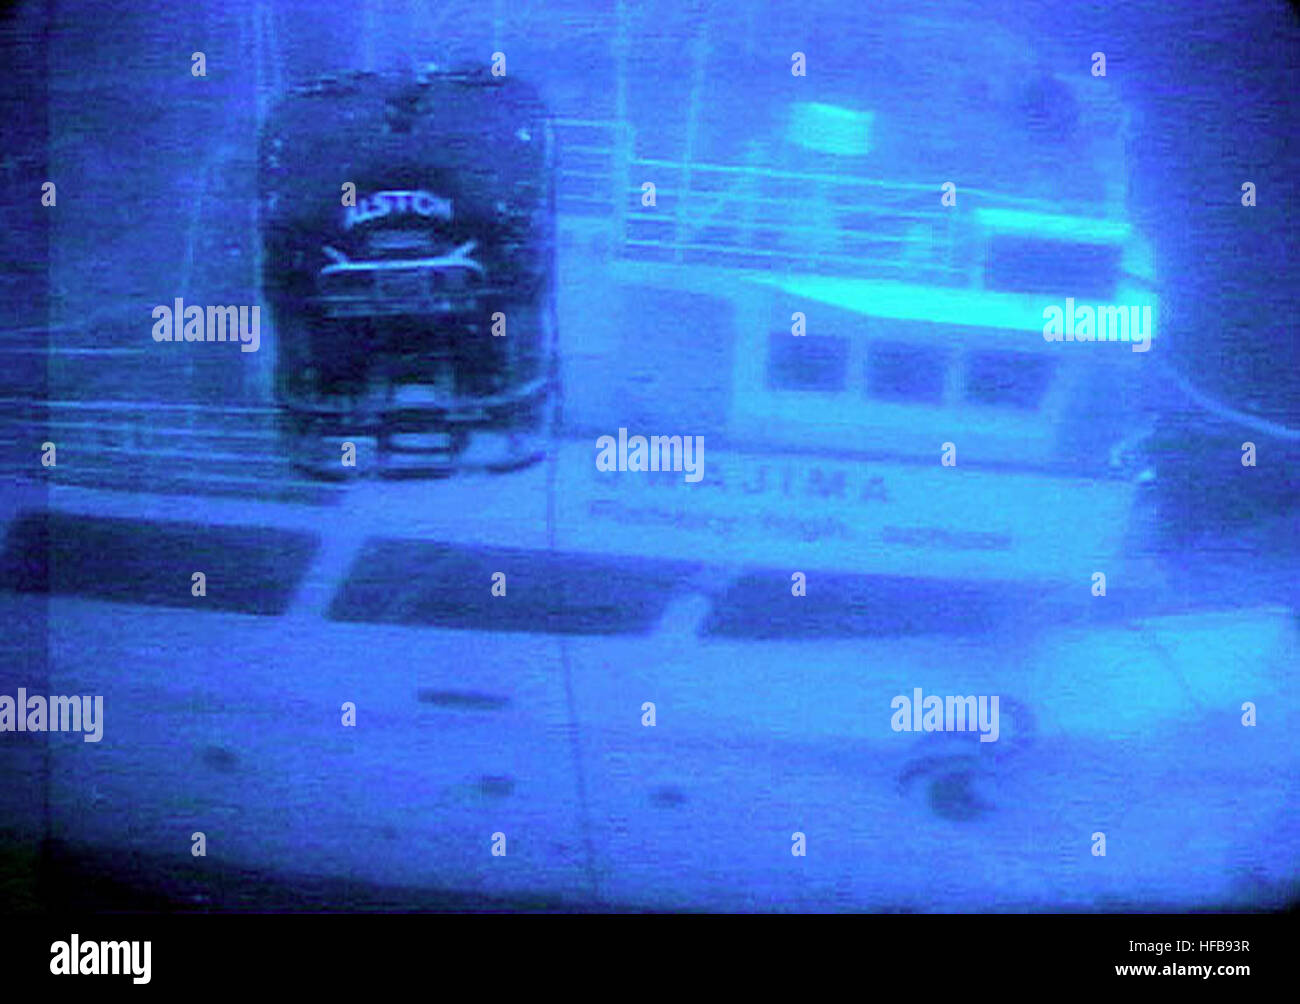 Underwater shot of the Remotely Operated Vehicles (ROV) TXL-16, assisting with salvage, during the recovery operations for the Japanese fishing vessel Ehime Maru. EhimeMaruSalvage Stock Photo